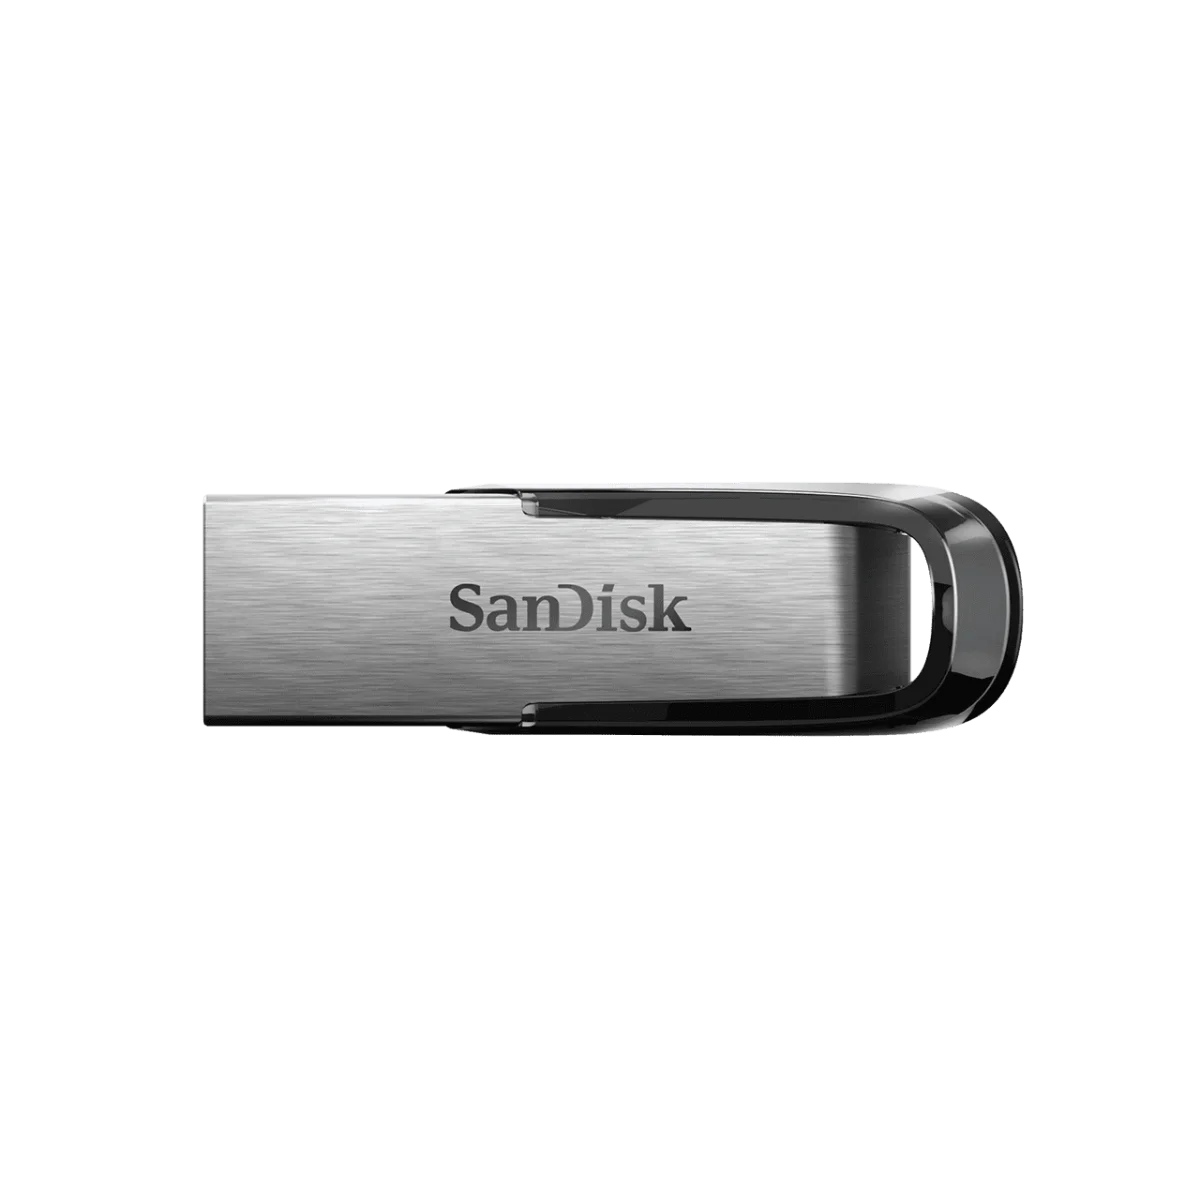 Ultra Flair Usb 3 0 Front.png.thumb .1280.1280 Sandisk &Lt;Div Class=&Quot;Inheritpara Mb-4&Quot;&Gt; The Sandisk Ultra Flair™ Usb 3.0 Flash Drive Moves Your Files Fast. Spend Less Time Waiting To Transfer Files And Enjoy High-Speed Usb 3.0 Performance Of Up To 150Mb/S&Lt;A Class=&Quot;Disclosure&Quot; Tabindex=&Quot;0&Quot; Href=&Quot;Https://Shop.westerndigital.com/Products/Usb-Flash-Drives/Sandisk-Ultra-Flair-Usb-3-0#Disclosures&Quot; Target=&Quot;_Self&Quot; Rel=&Quot;Noopener Noreferrer&Quot; Aria-Labelledby=&Quot;Disclosures&Quot;&Gt;&Lt;Sup&Gt;**&Lt;/Sup&Gt;&Lt;/A&Gt;. Its Durable And Sleek Metal Casing Is Tough Enough To Handle Knocks With Style. And, With Password Protection, You Can Rest Assured That Your Private Files Stay Private&Lt;A Class=&Quot;Disclosure&Quot; Tabindex=&Quot;0&Quot; Href=&Quot;Https://Shop.westerndigital.com/Products/Usb-Flash-Drives/Sandisk-Ultra-Flair-Usb-3-0#Disclosures&Quot; Target=&Quot;_Self&Quot; Rel=&Quot;Noopener Noreferrer&Quot; Aria-Labelledby=&Quot;Disclosures&Quot;&Gt;&Lt;Sup&Gt;1&Lt;/Sup&Gt;&Lt;/A&Gt;. Store Your Files In Style With The Sandisk Ultra Flair Usb 3.0 Flash Drive. &Lt;Strong&Gt;Warranty&Lt;/Strong&Gt; The Sandisk Ultra Flair Usb 3.0 Flash Drive Is Backed By A Five-Year Manufacturer Warranty&Lt;A Class=&Quot;Disclosure&Quot; Tabindex=&Quot;0&Quot; Href=&Quot;Https://Shop.westerndigital.com/Products/Usb-Flash-Drives/Sandisk-Ultra-Flair-Usb-3-0#Disclosures&Quot; Target=&Quot;_Self&Quot; Rel=&Quot;Noopener Noreferrer&Quot; Aria-Labelledby=&Quot;Disclosures&Quot;&Gt;&Lt;Sup&Gt;2&Lt;/Sup&Gt;&Lt;/A&Gt; &Lt;/Div&Gt; Flash Drive Sandisk Ultra Flair Usb 3.0 Flash Drive (64Gb)